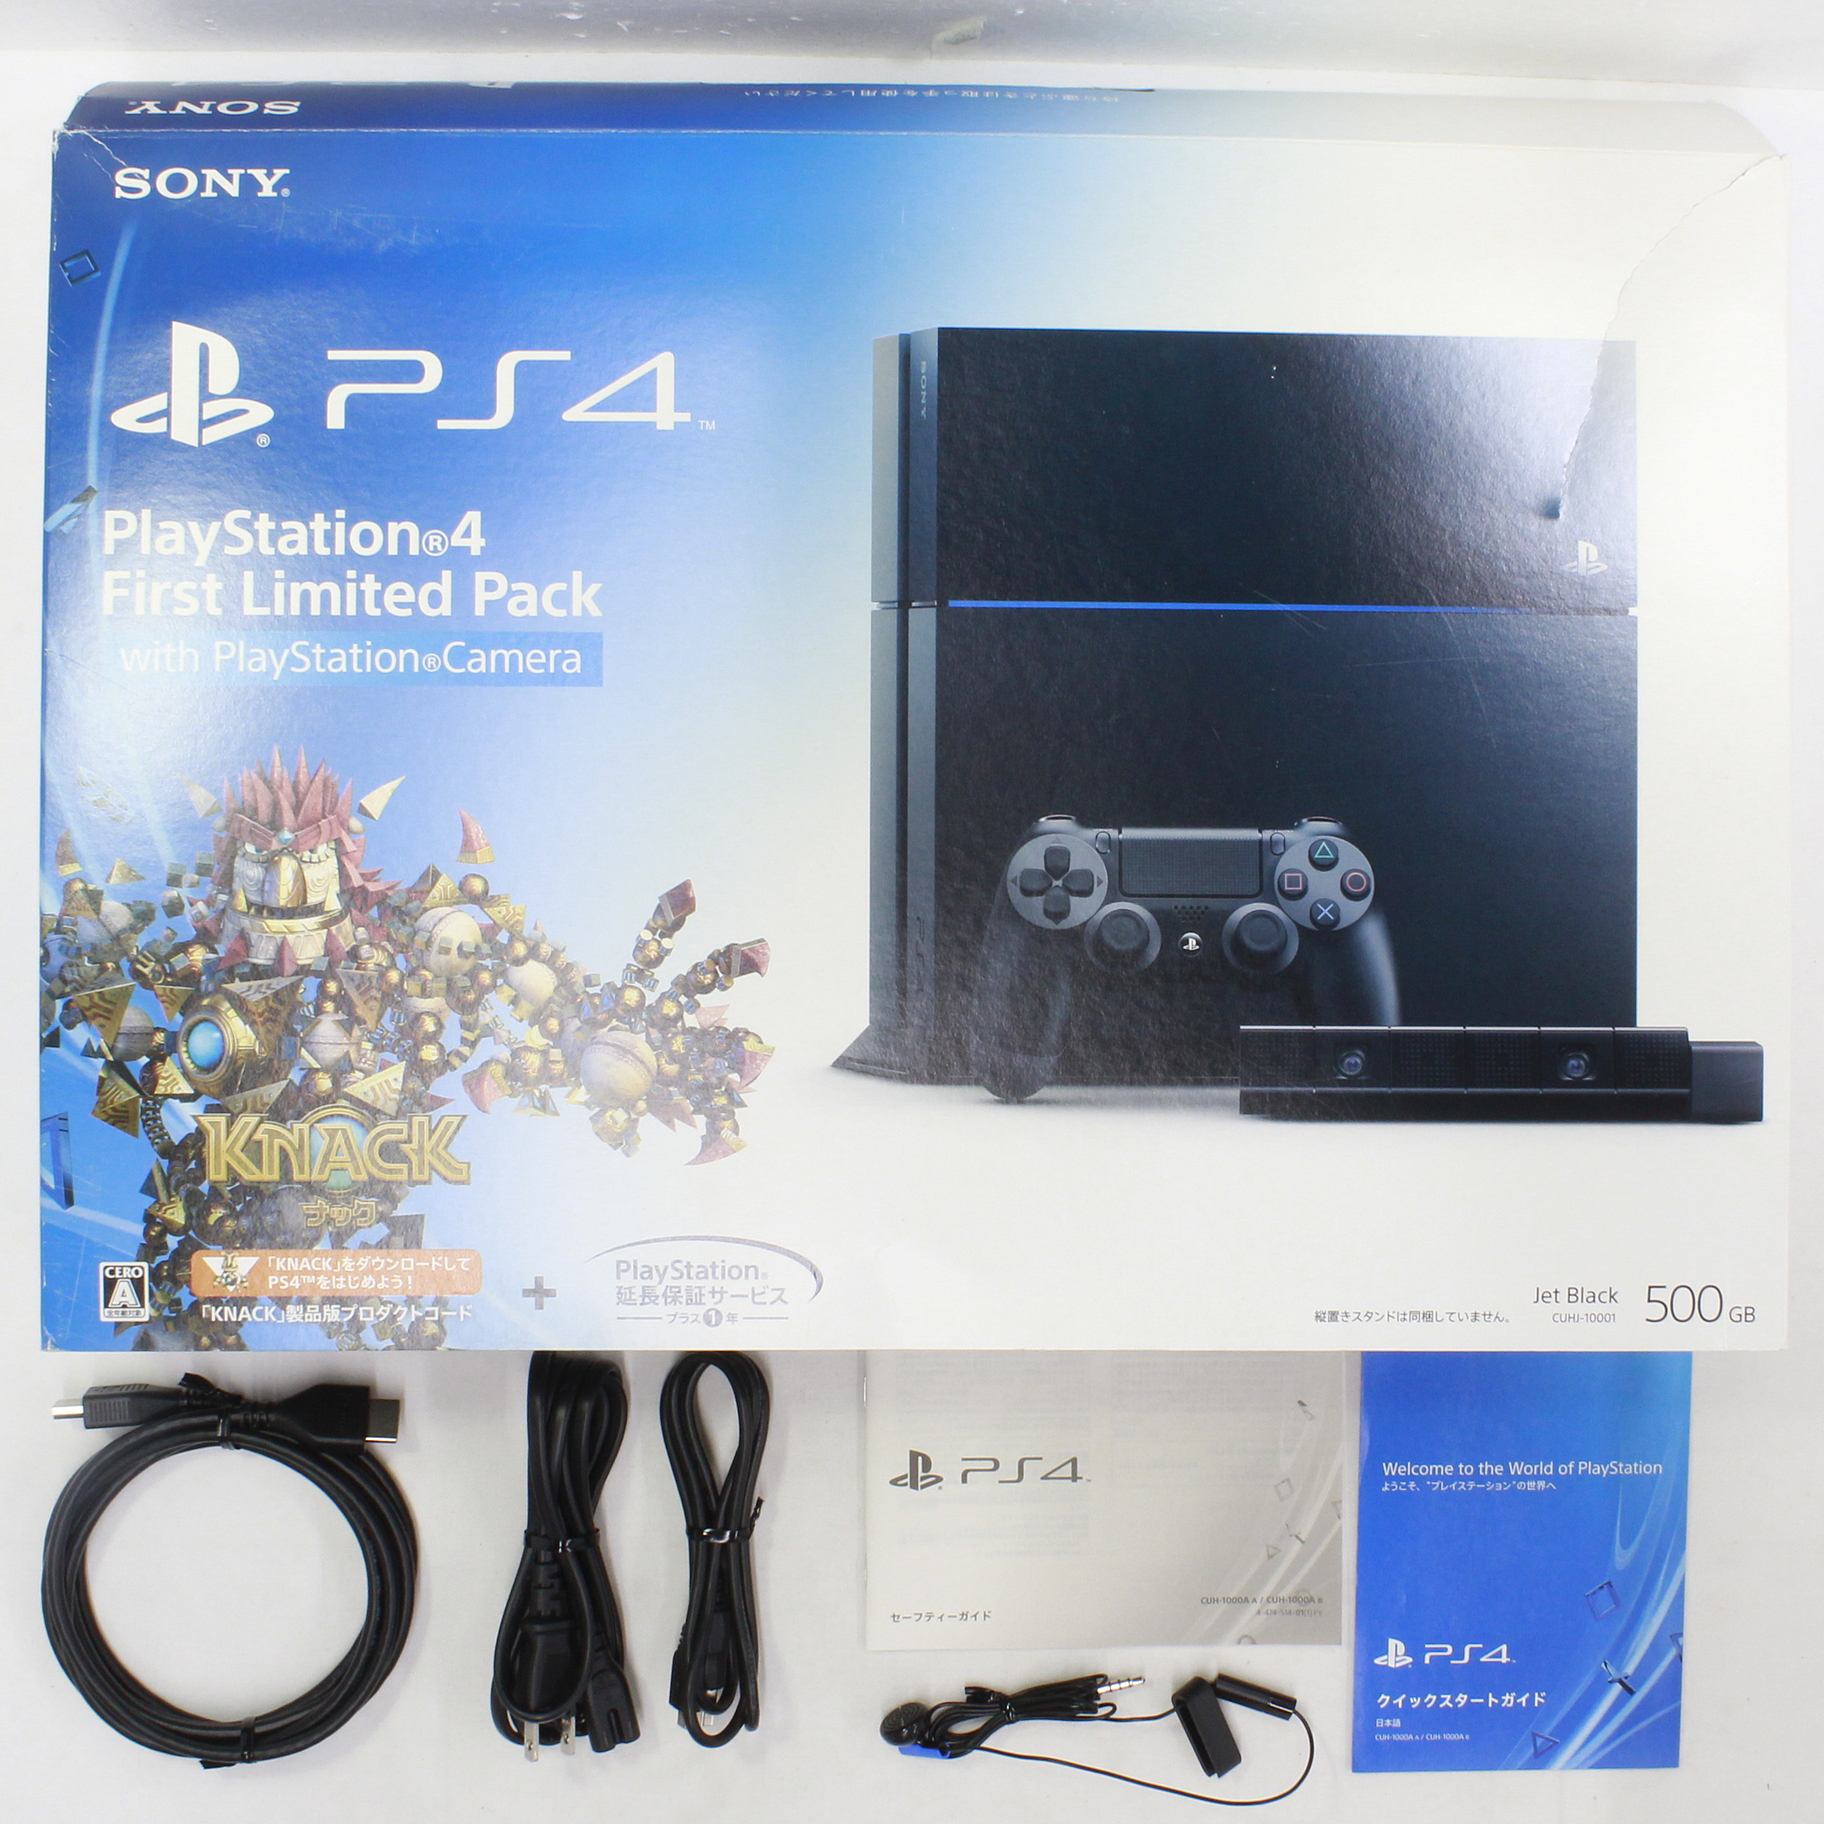 PlayStation 4 First Limited Pack with PlayStation Camera CUHJ-10001